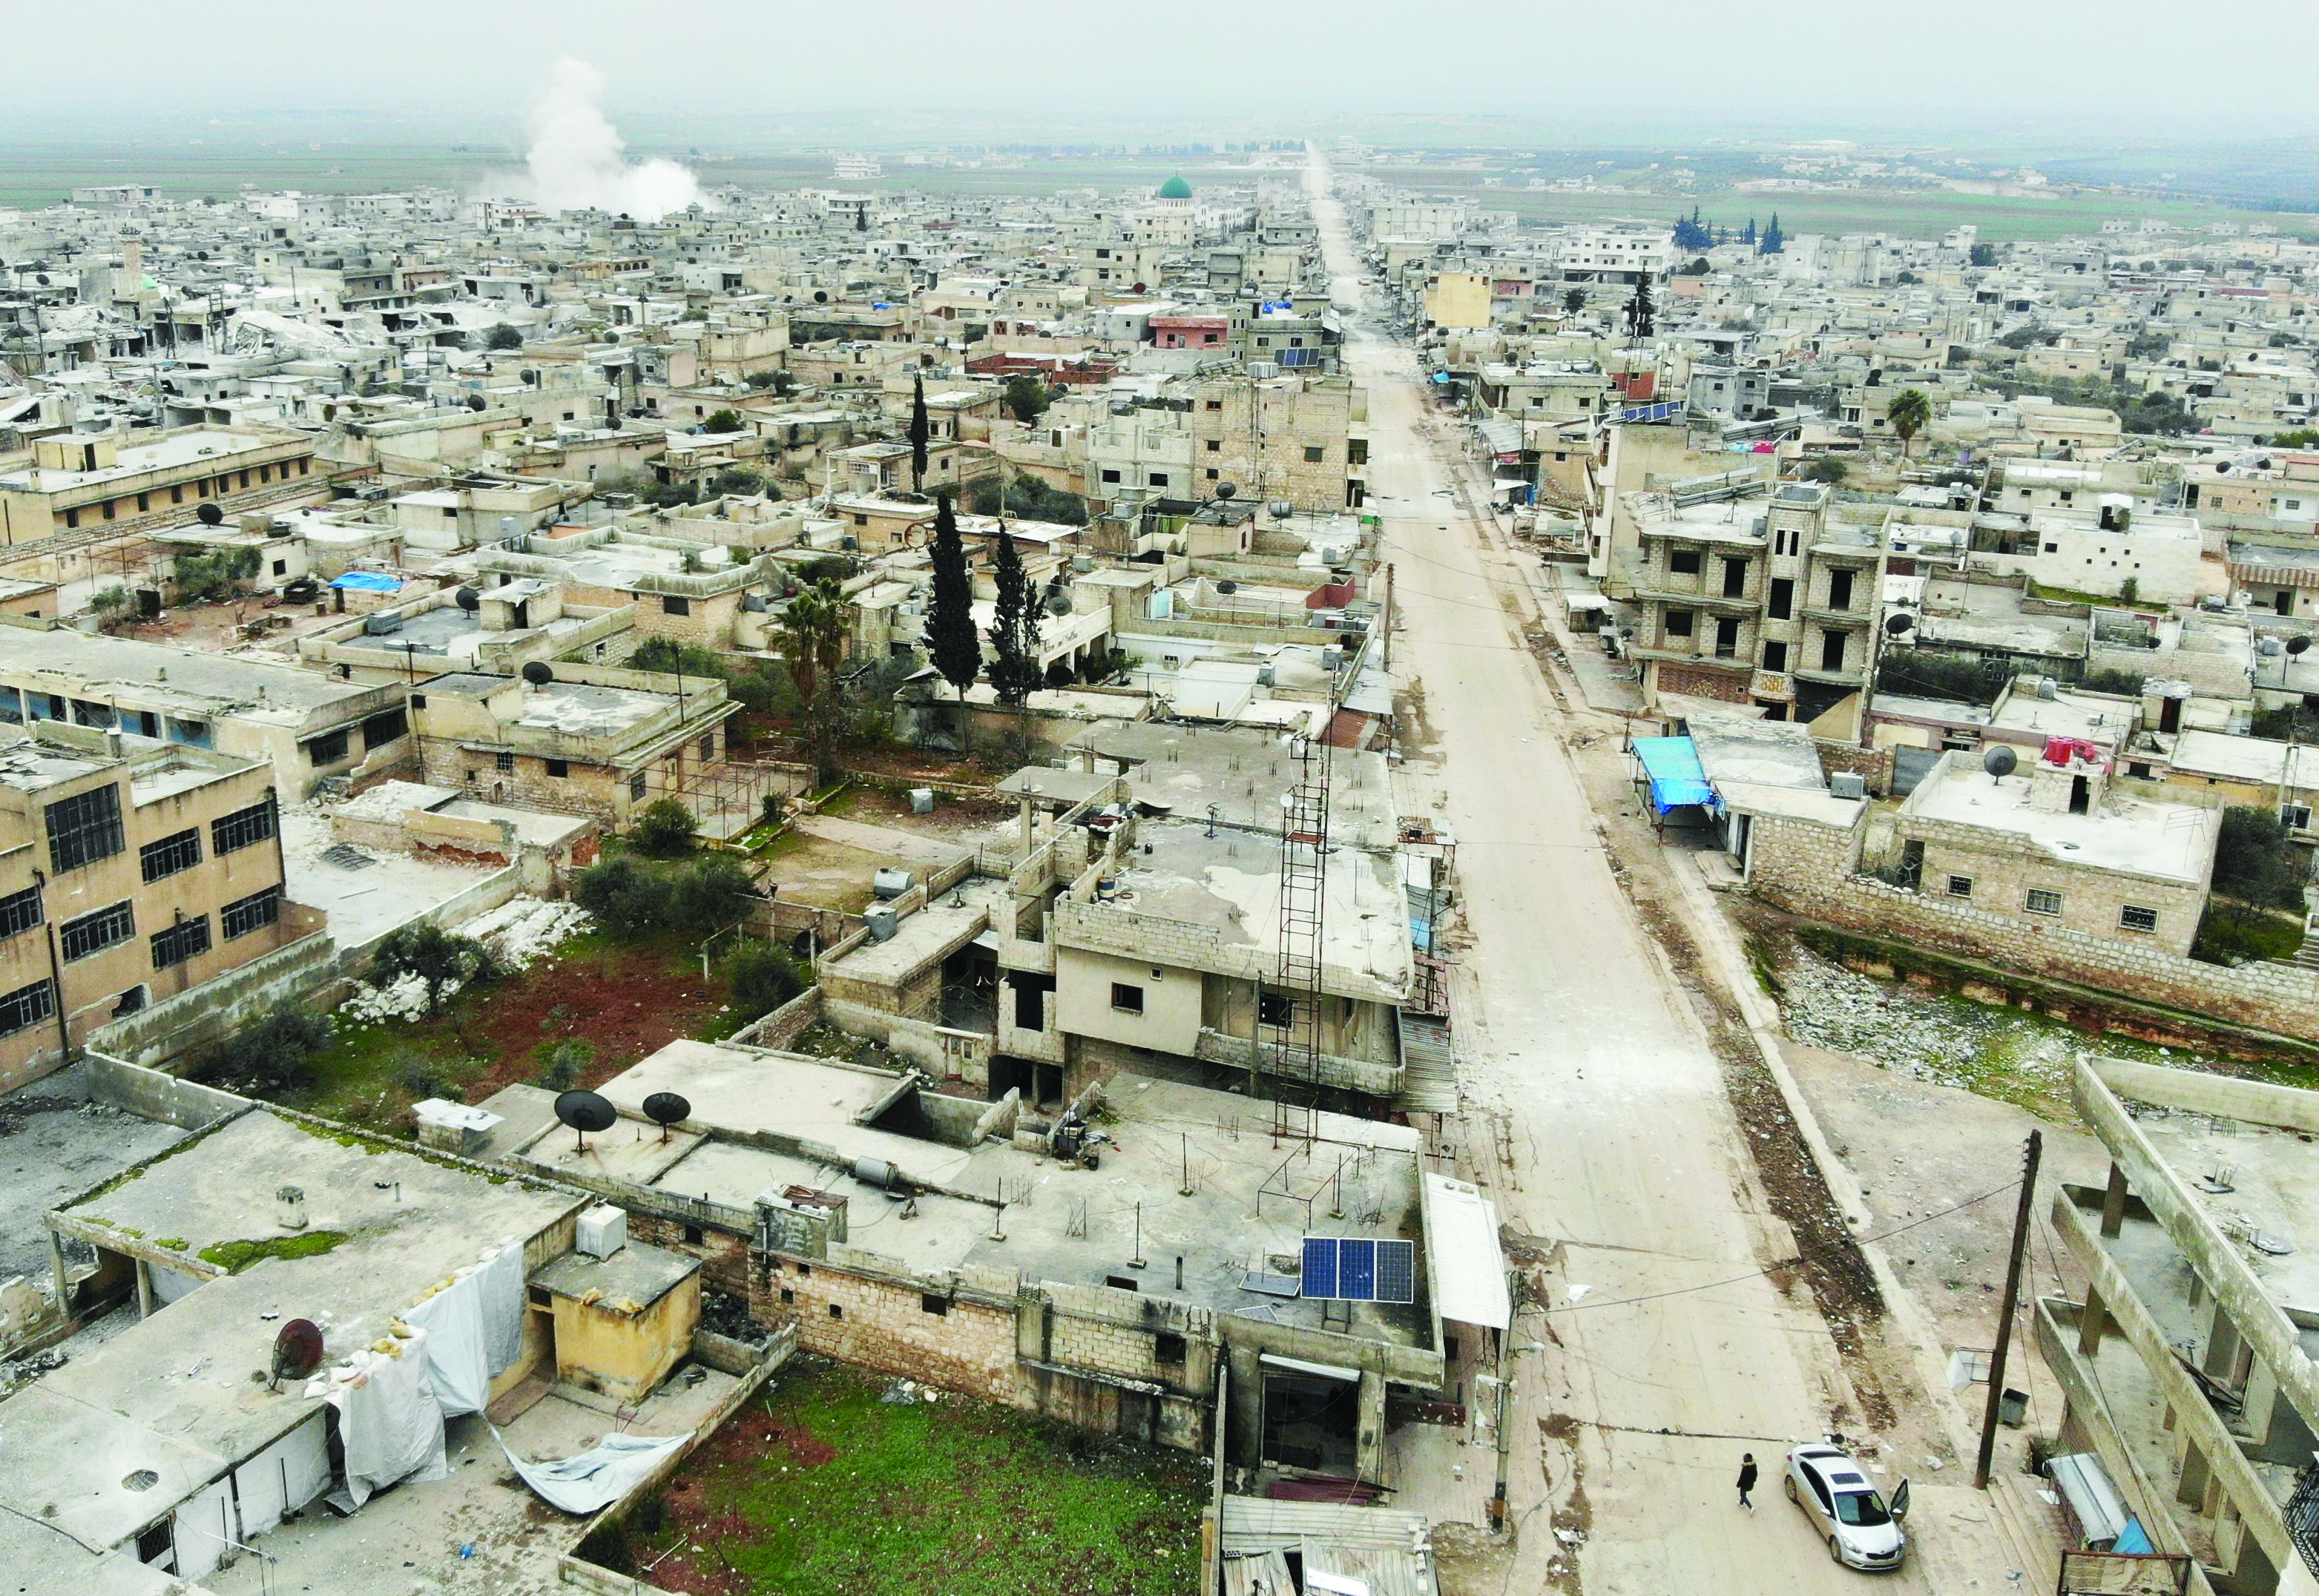 An aerial view shows the village of Maaret al-Naasan in Syria's Idlib province on February 12, 2020 following a weeks-long regime offensive against the country's last major rebel bastion. - Syrian regime forces pushed on with their offensive in the country's northwest, securing areas along a key national highway they seized, as tensions spiralled with Turkey which supports rebel groups. (Photo by Omar HAJ KADOUR / AFP)